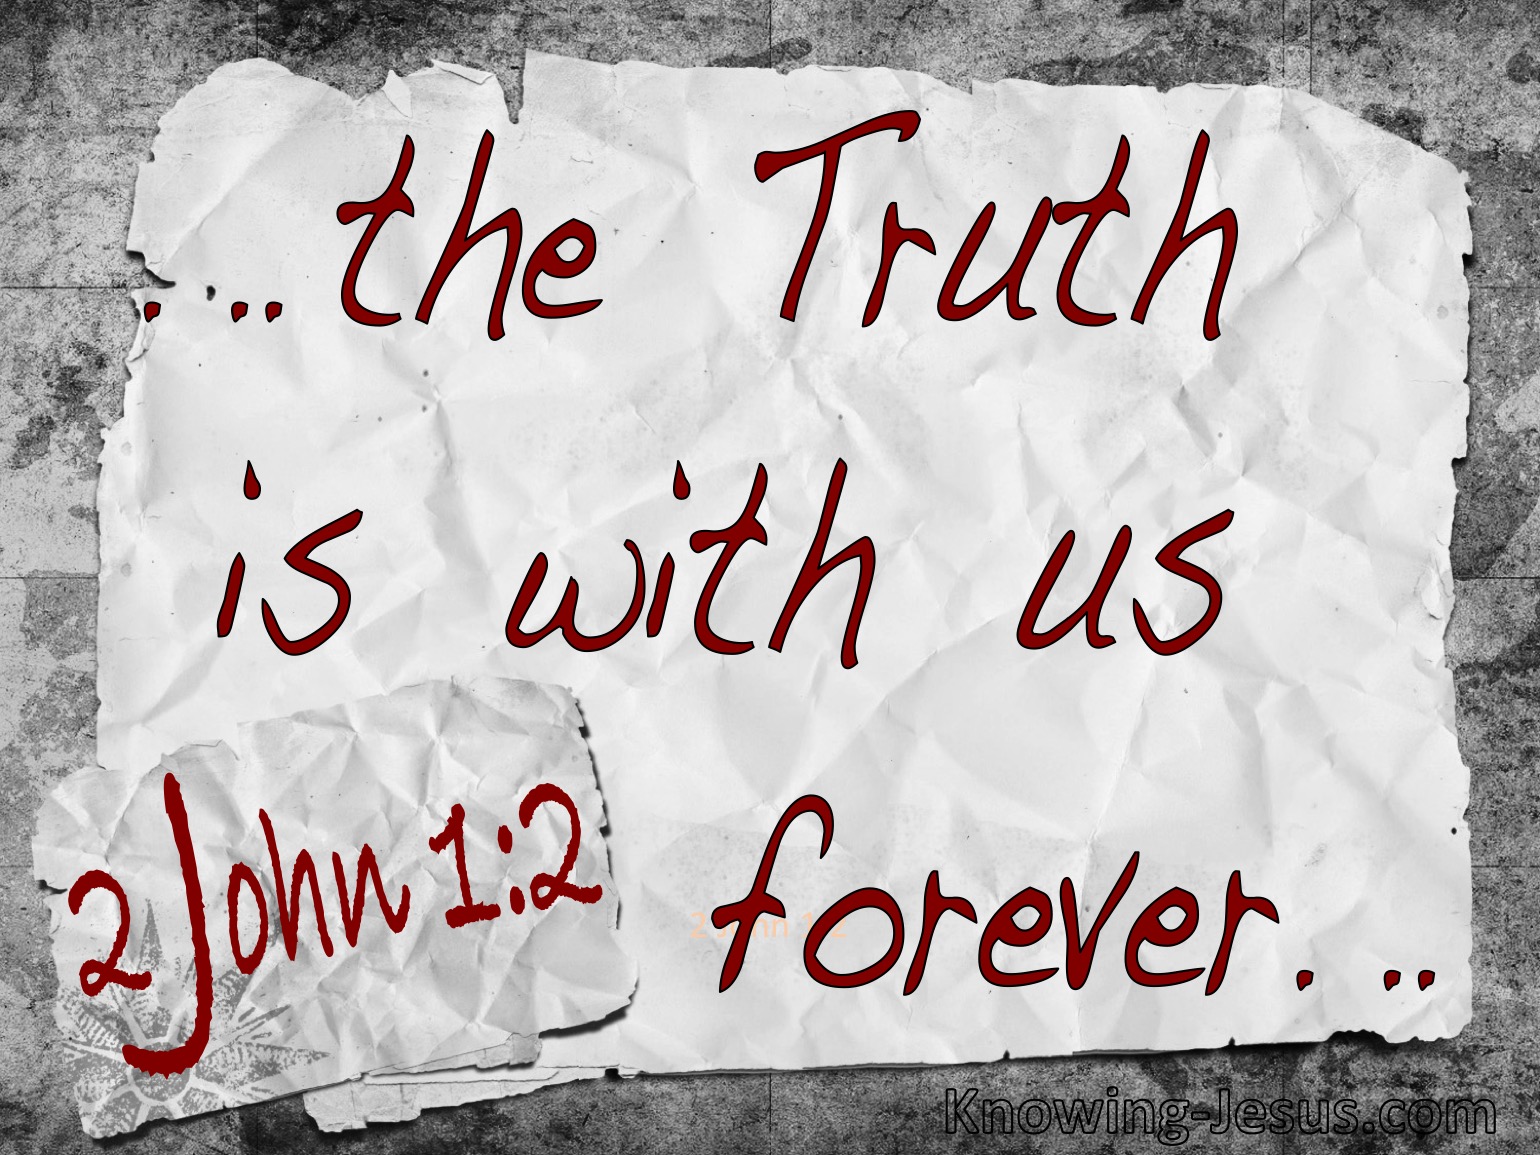 How Jesus redefines “love” and “truth” – 2nd John, Part 2